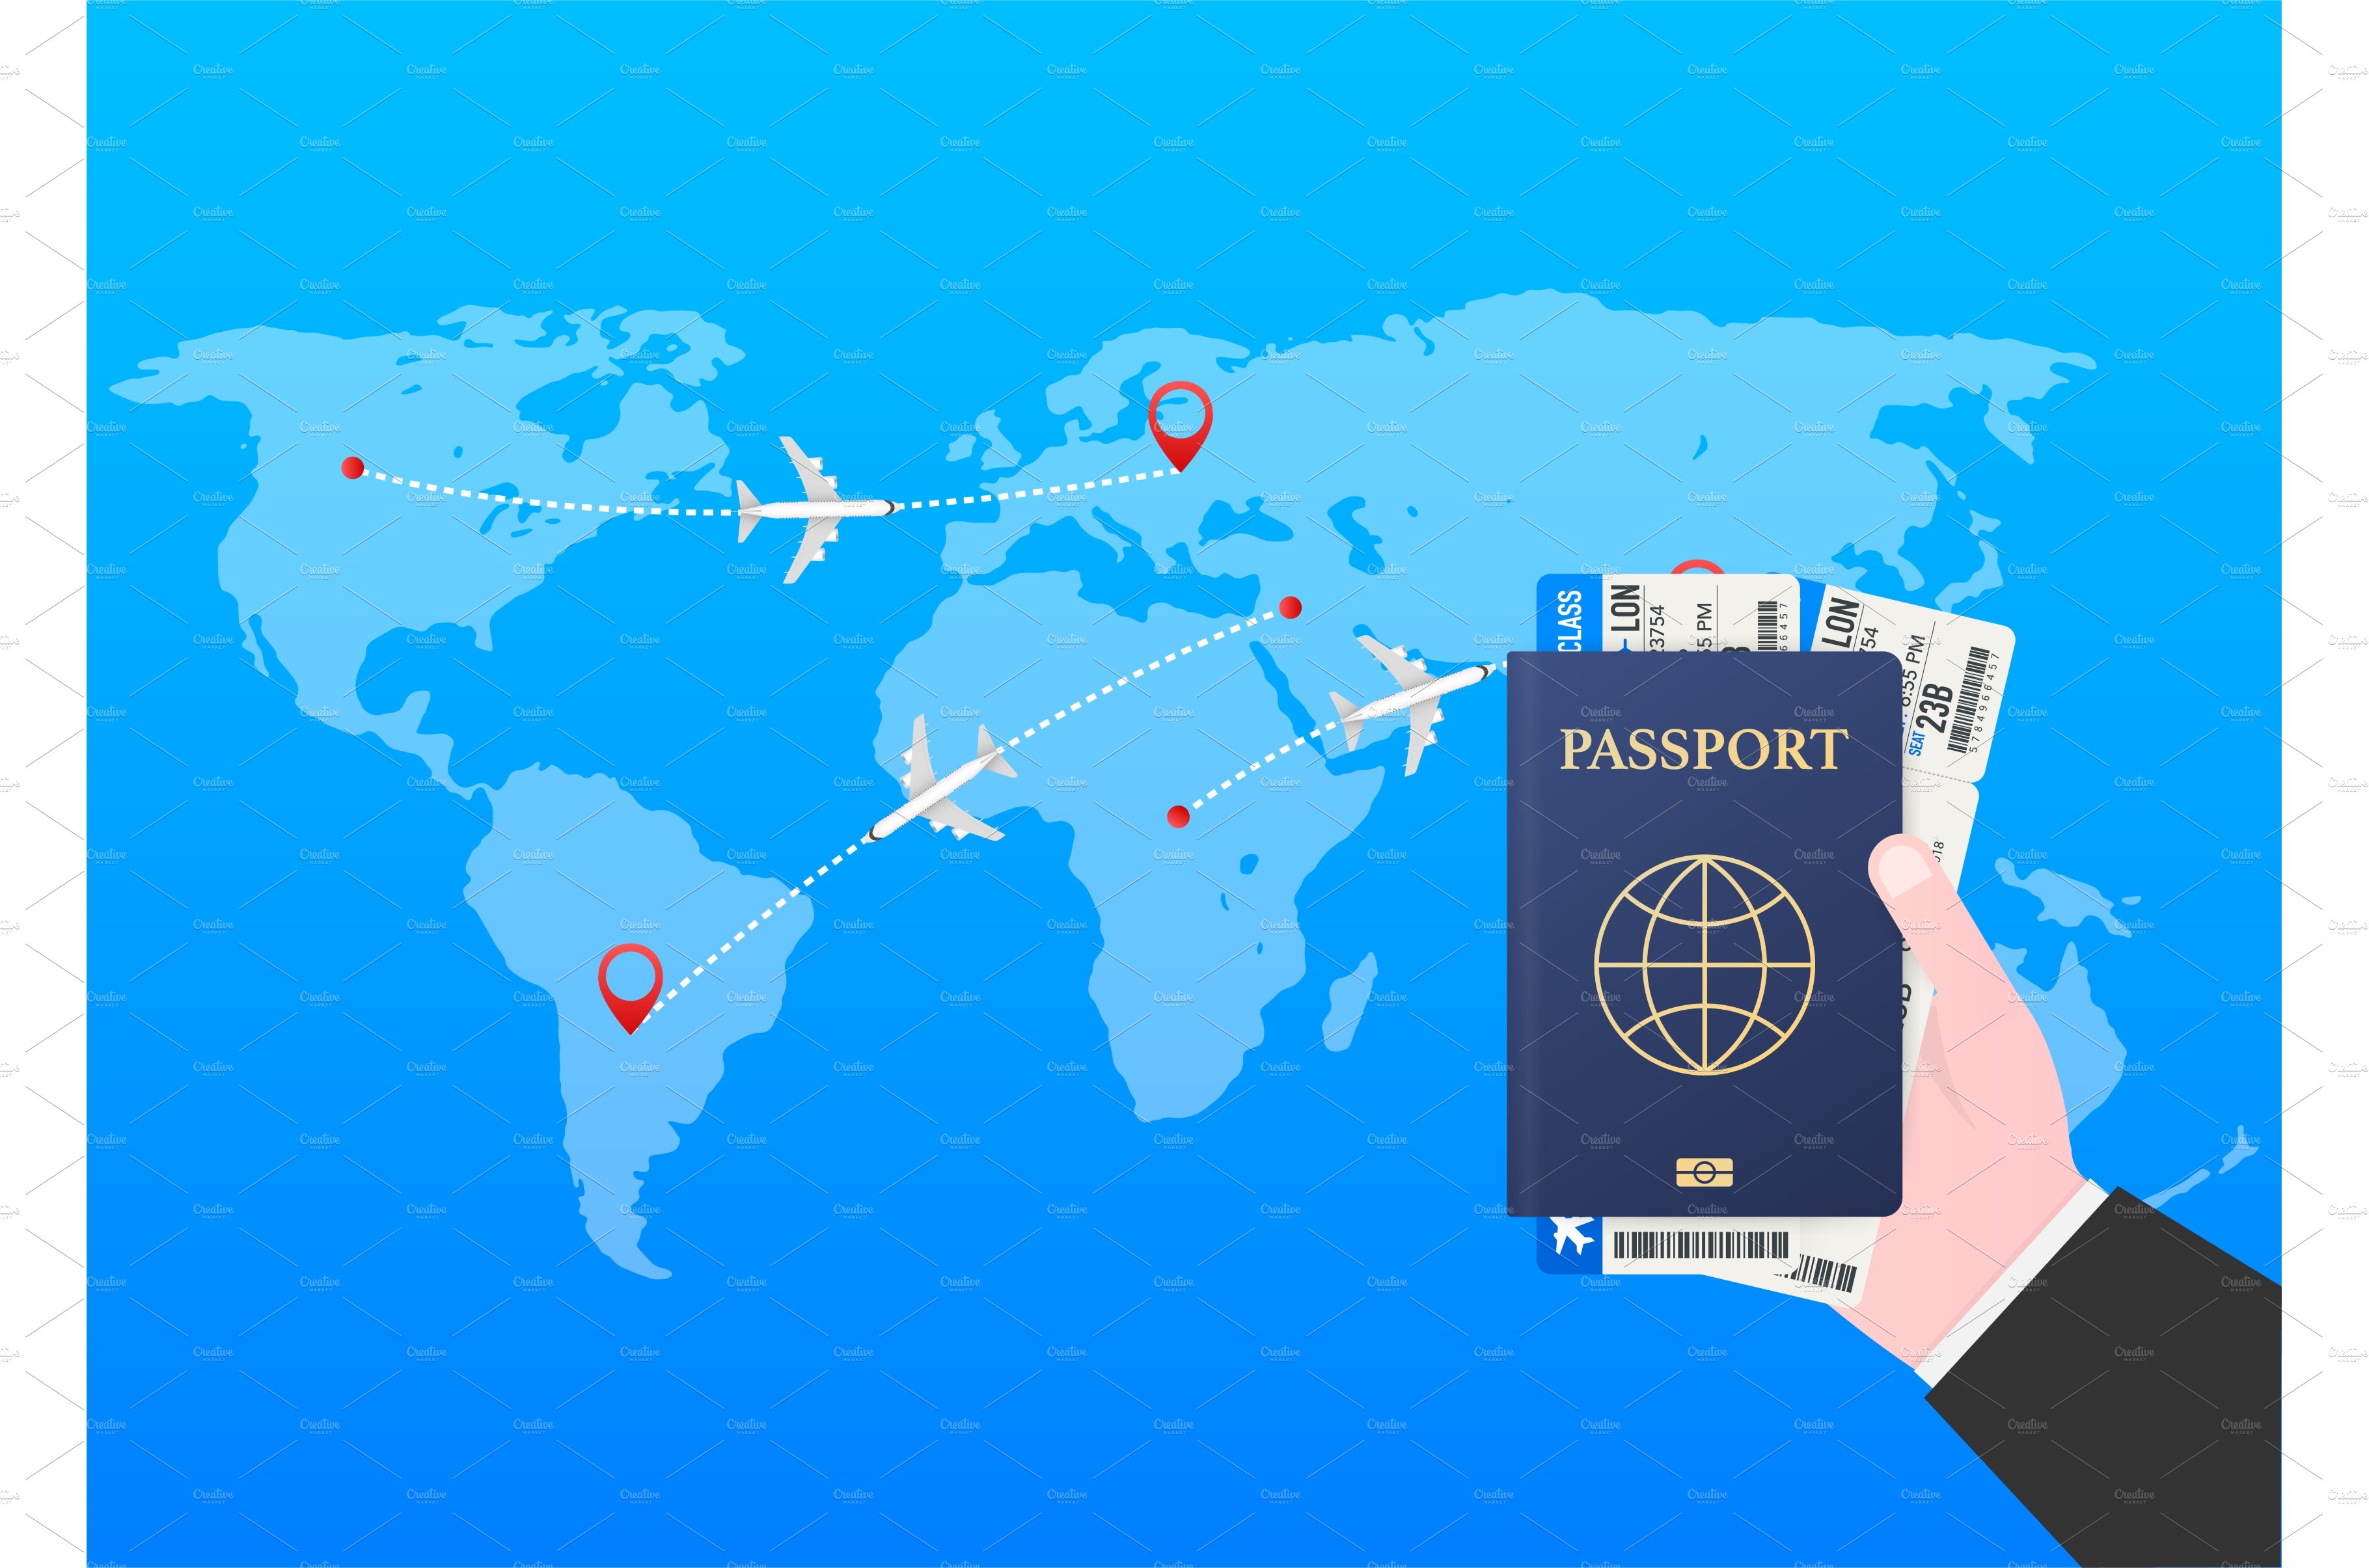 Passport for travel and tourism cover image.